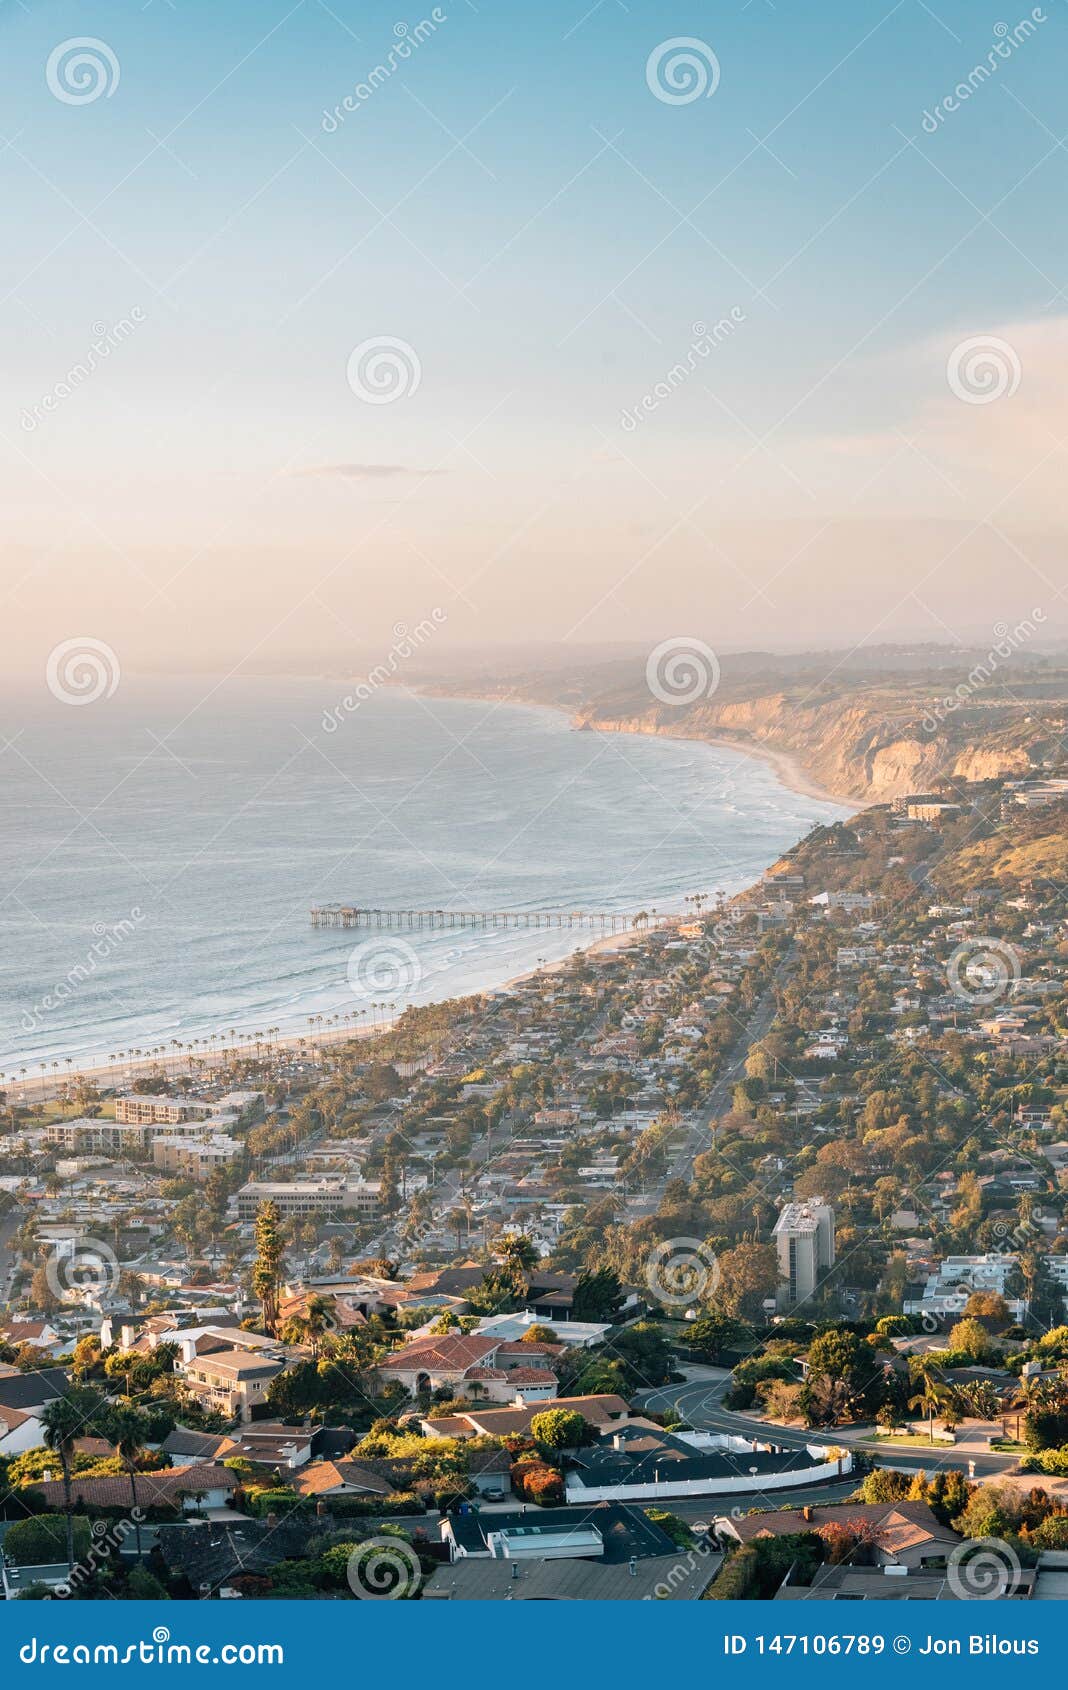 view of the pacific coast at sunset from mount soledad in la jolla, san diego, california